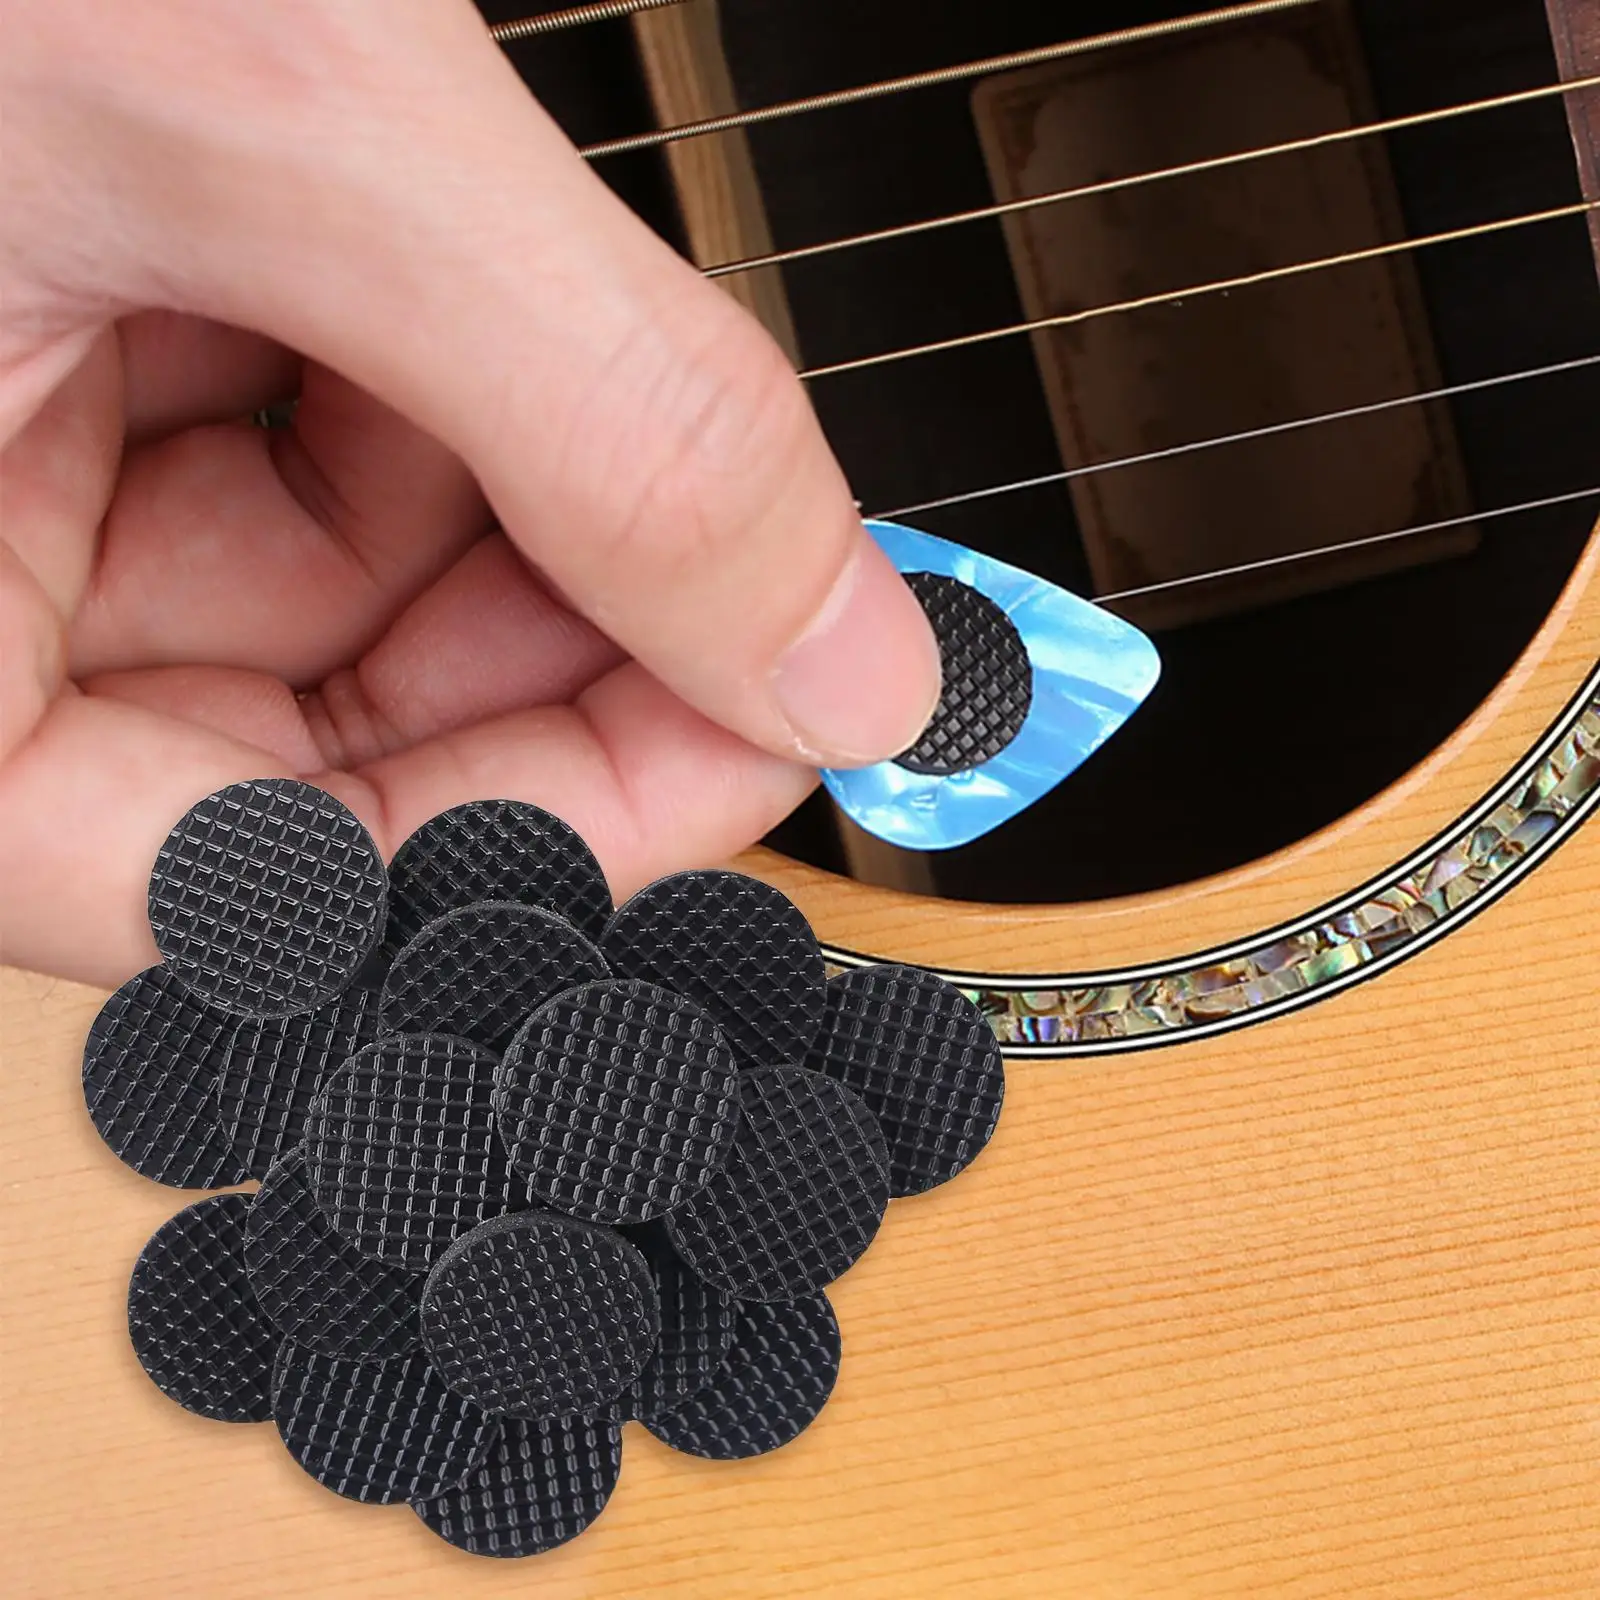 20x Grips for Guitar Picks Durable Soft Help You Hold Guitar Picks Tightly Comfortable